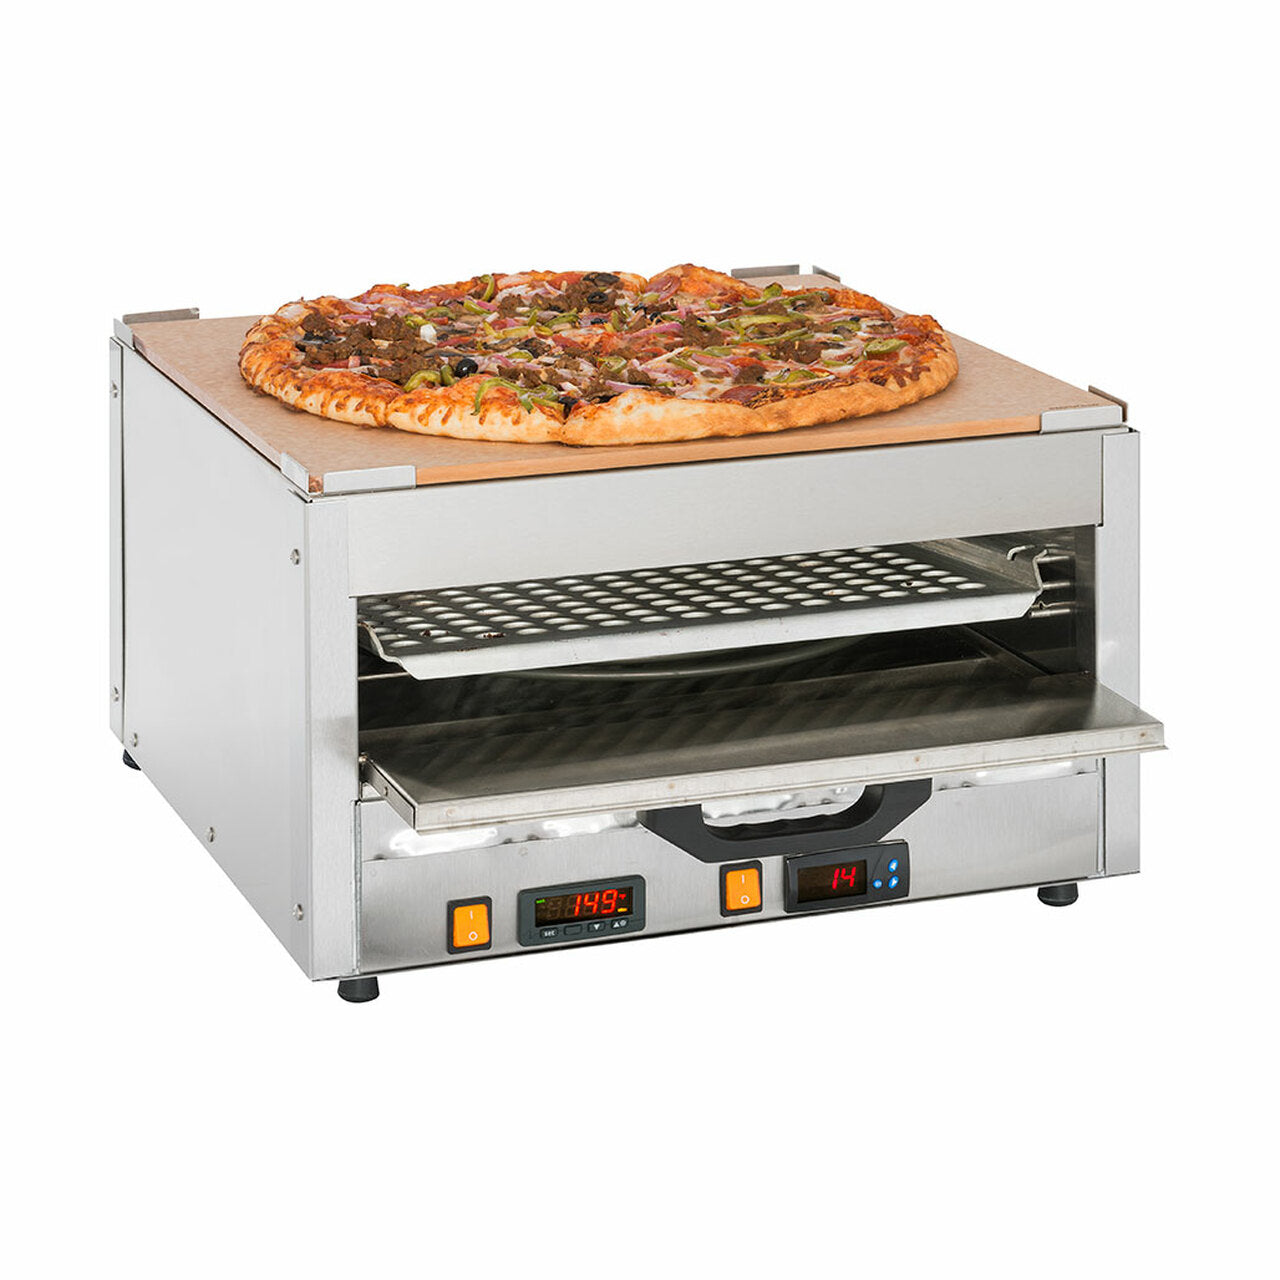 Cretors Pizza Oven for evenly and uniformly cooking the pizza.